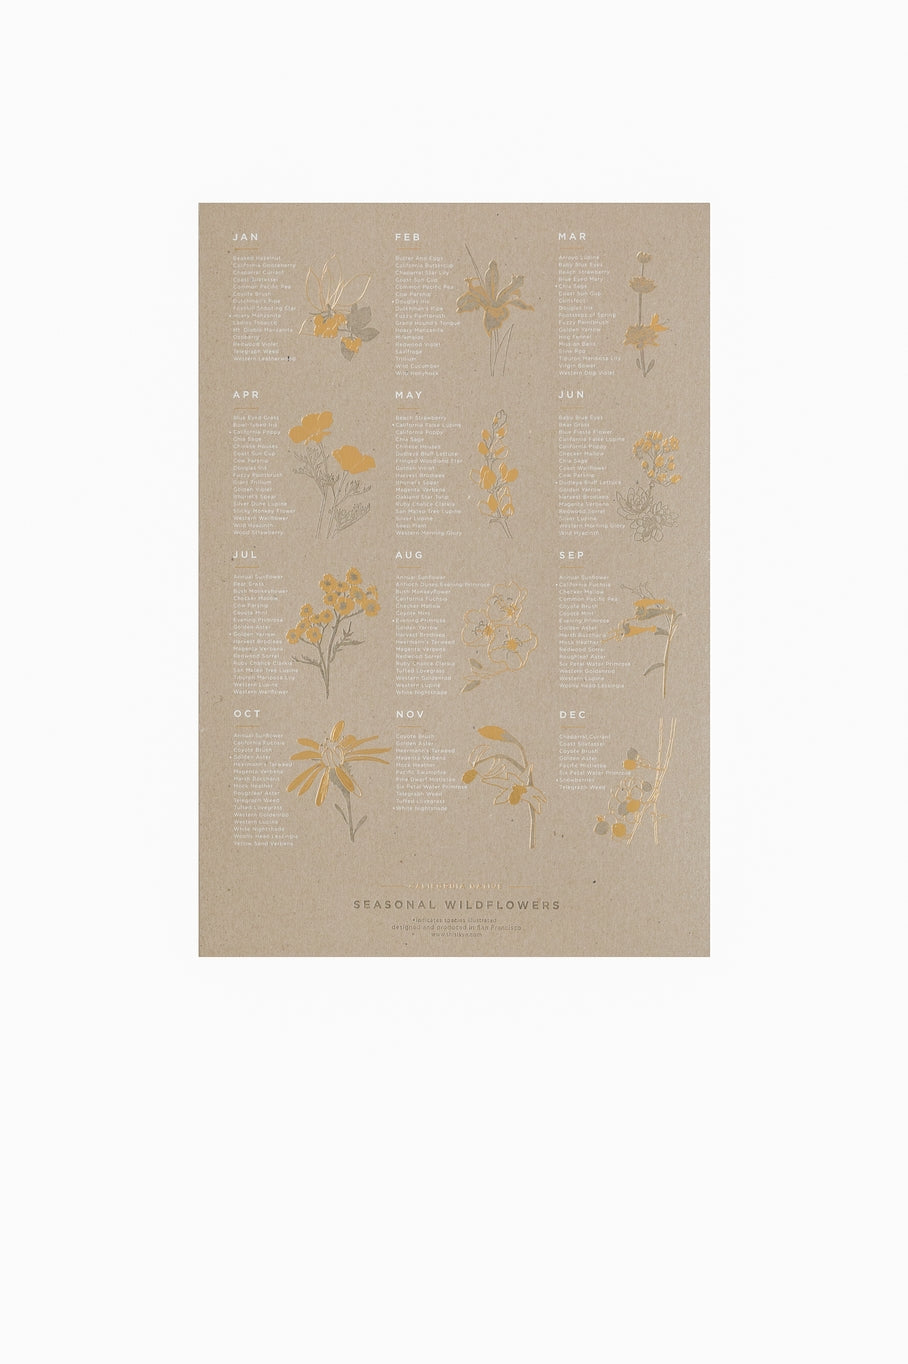 The California Native Wildflower Poster features 150 native species as they bloom each month. The poster features both prolific, common and rare species that are native specifically to the Central Coast and Bay Area. Great reference art that is both elegant and useful for your kitchen, dining room or kids room!